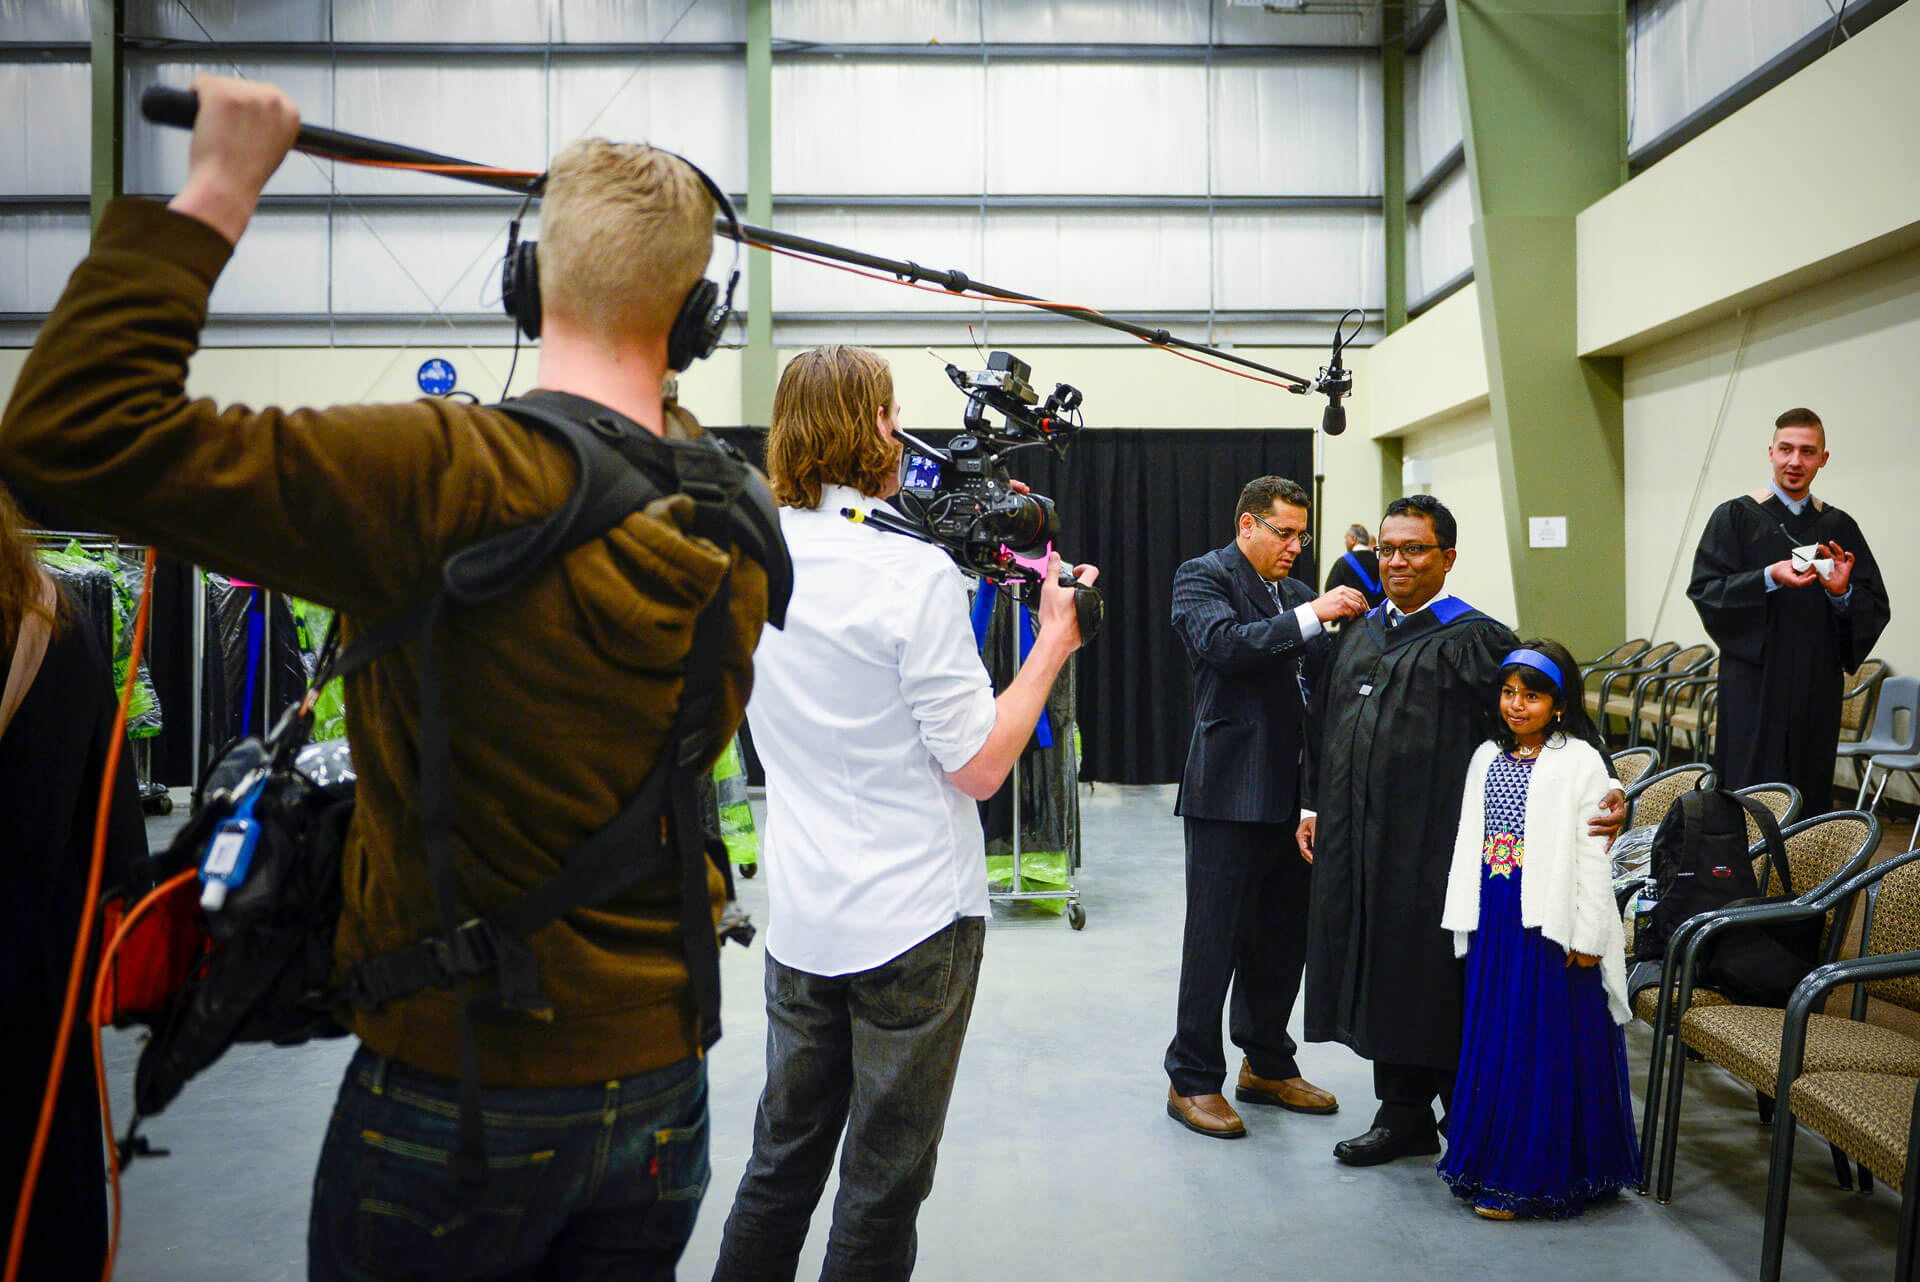 video crew films a graduate and their family inside the Athabasca Regional Multiplex